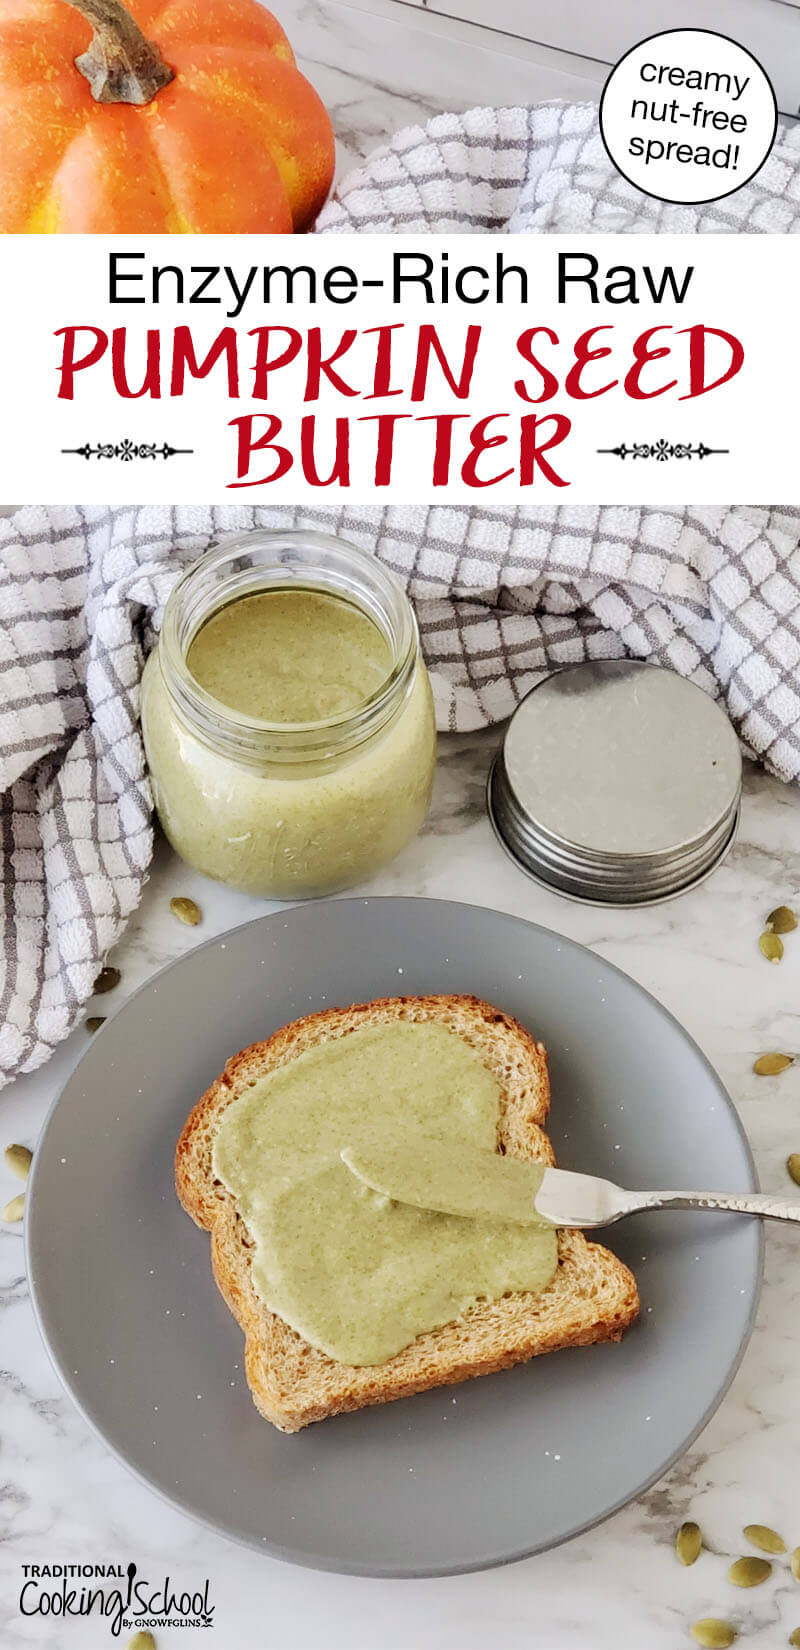 spreading pumpkin seed butter on a piece of toast. Text overlay says: "Enzyme-Rich Raw Pumpkin Seed Butter (creamy nut-free spread!)"